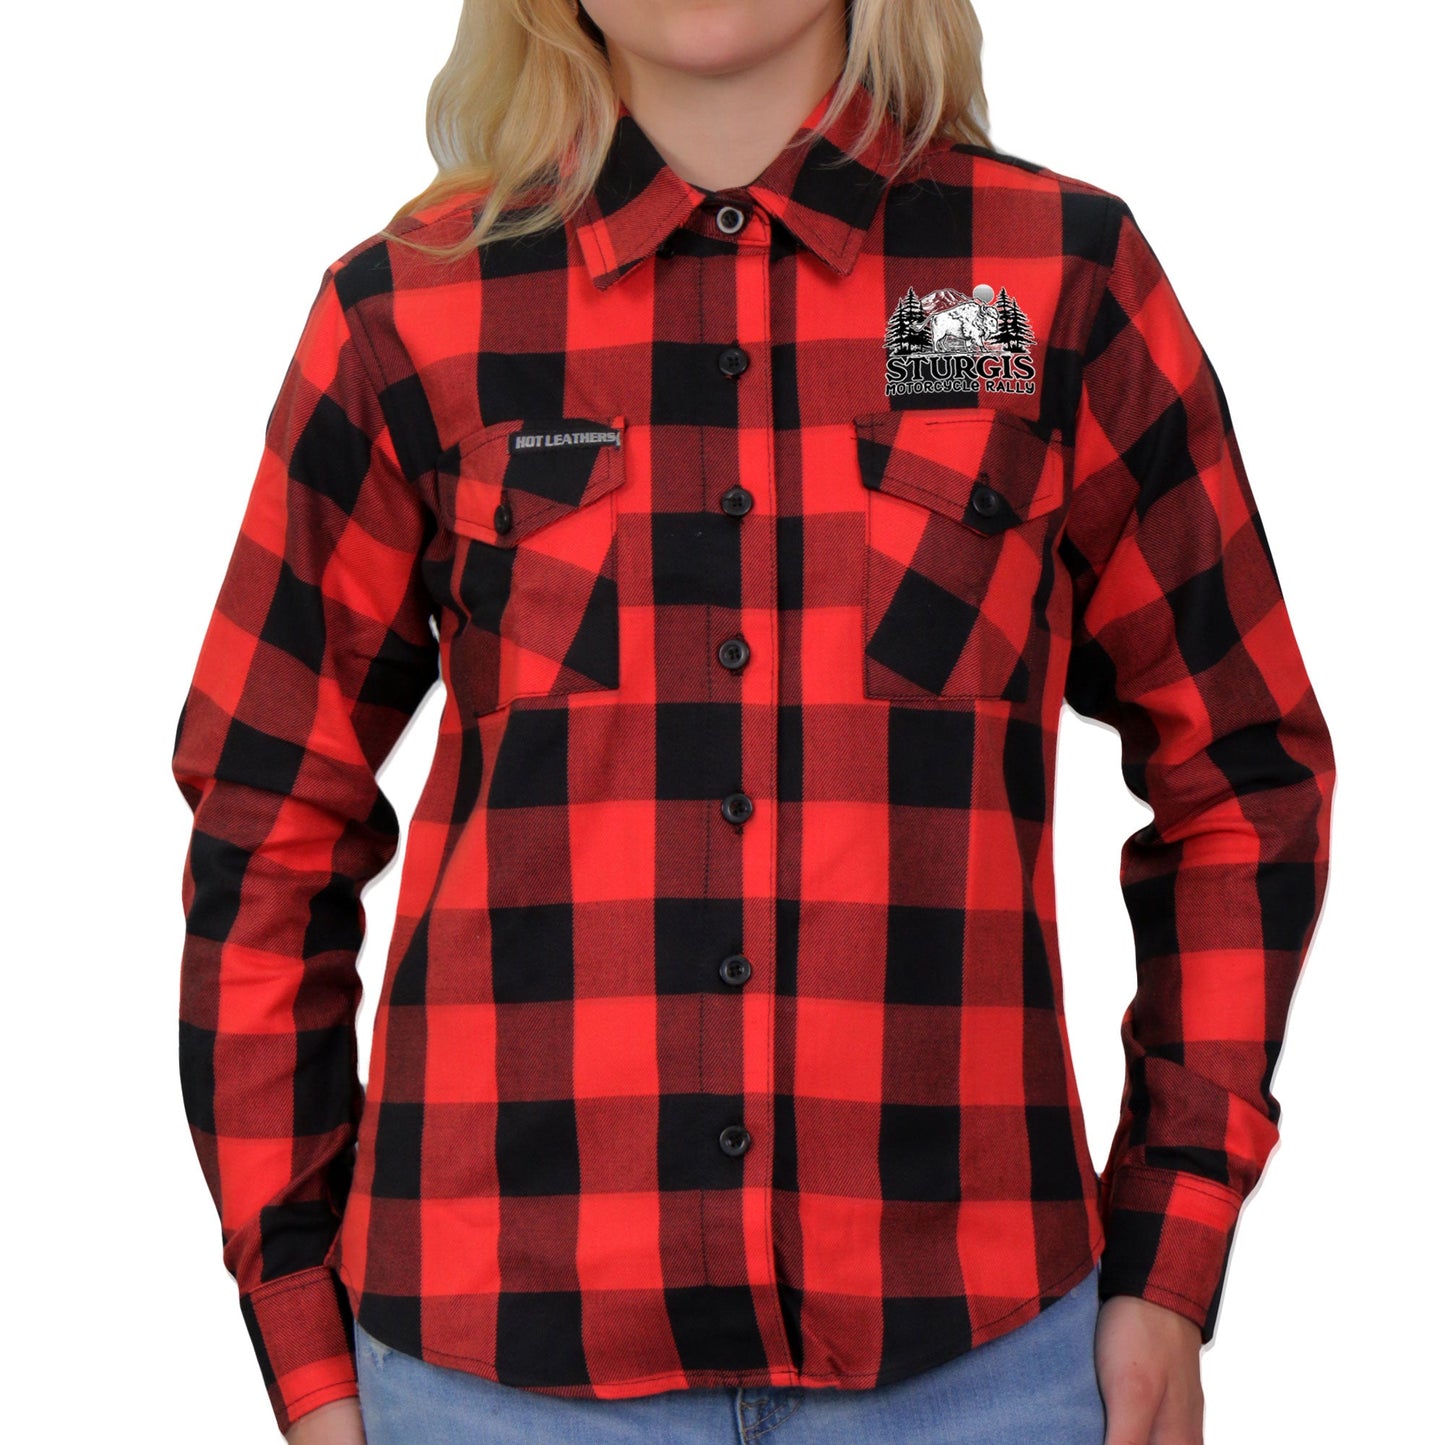 Sturgis Motorcycle Rally 2021 Camp Ladies Red Flannel Shirt